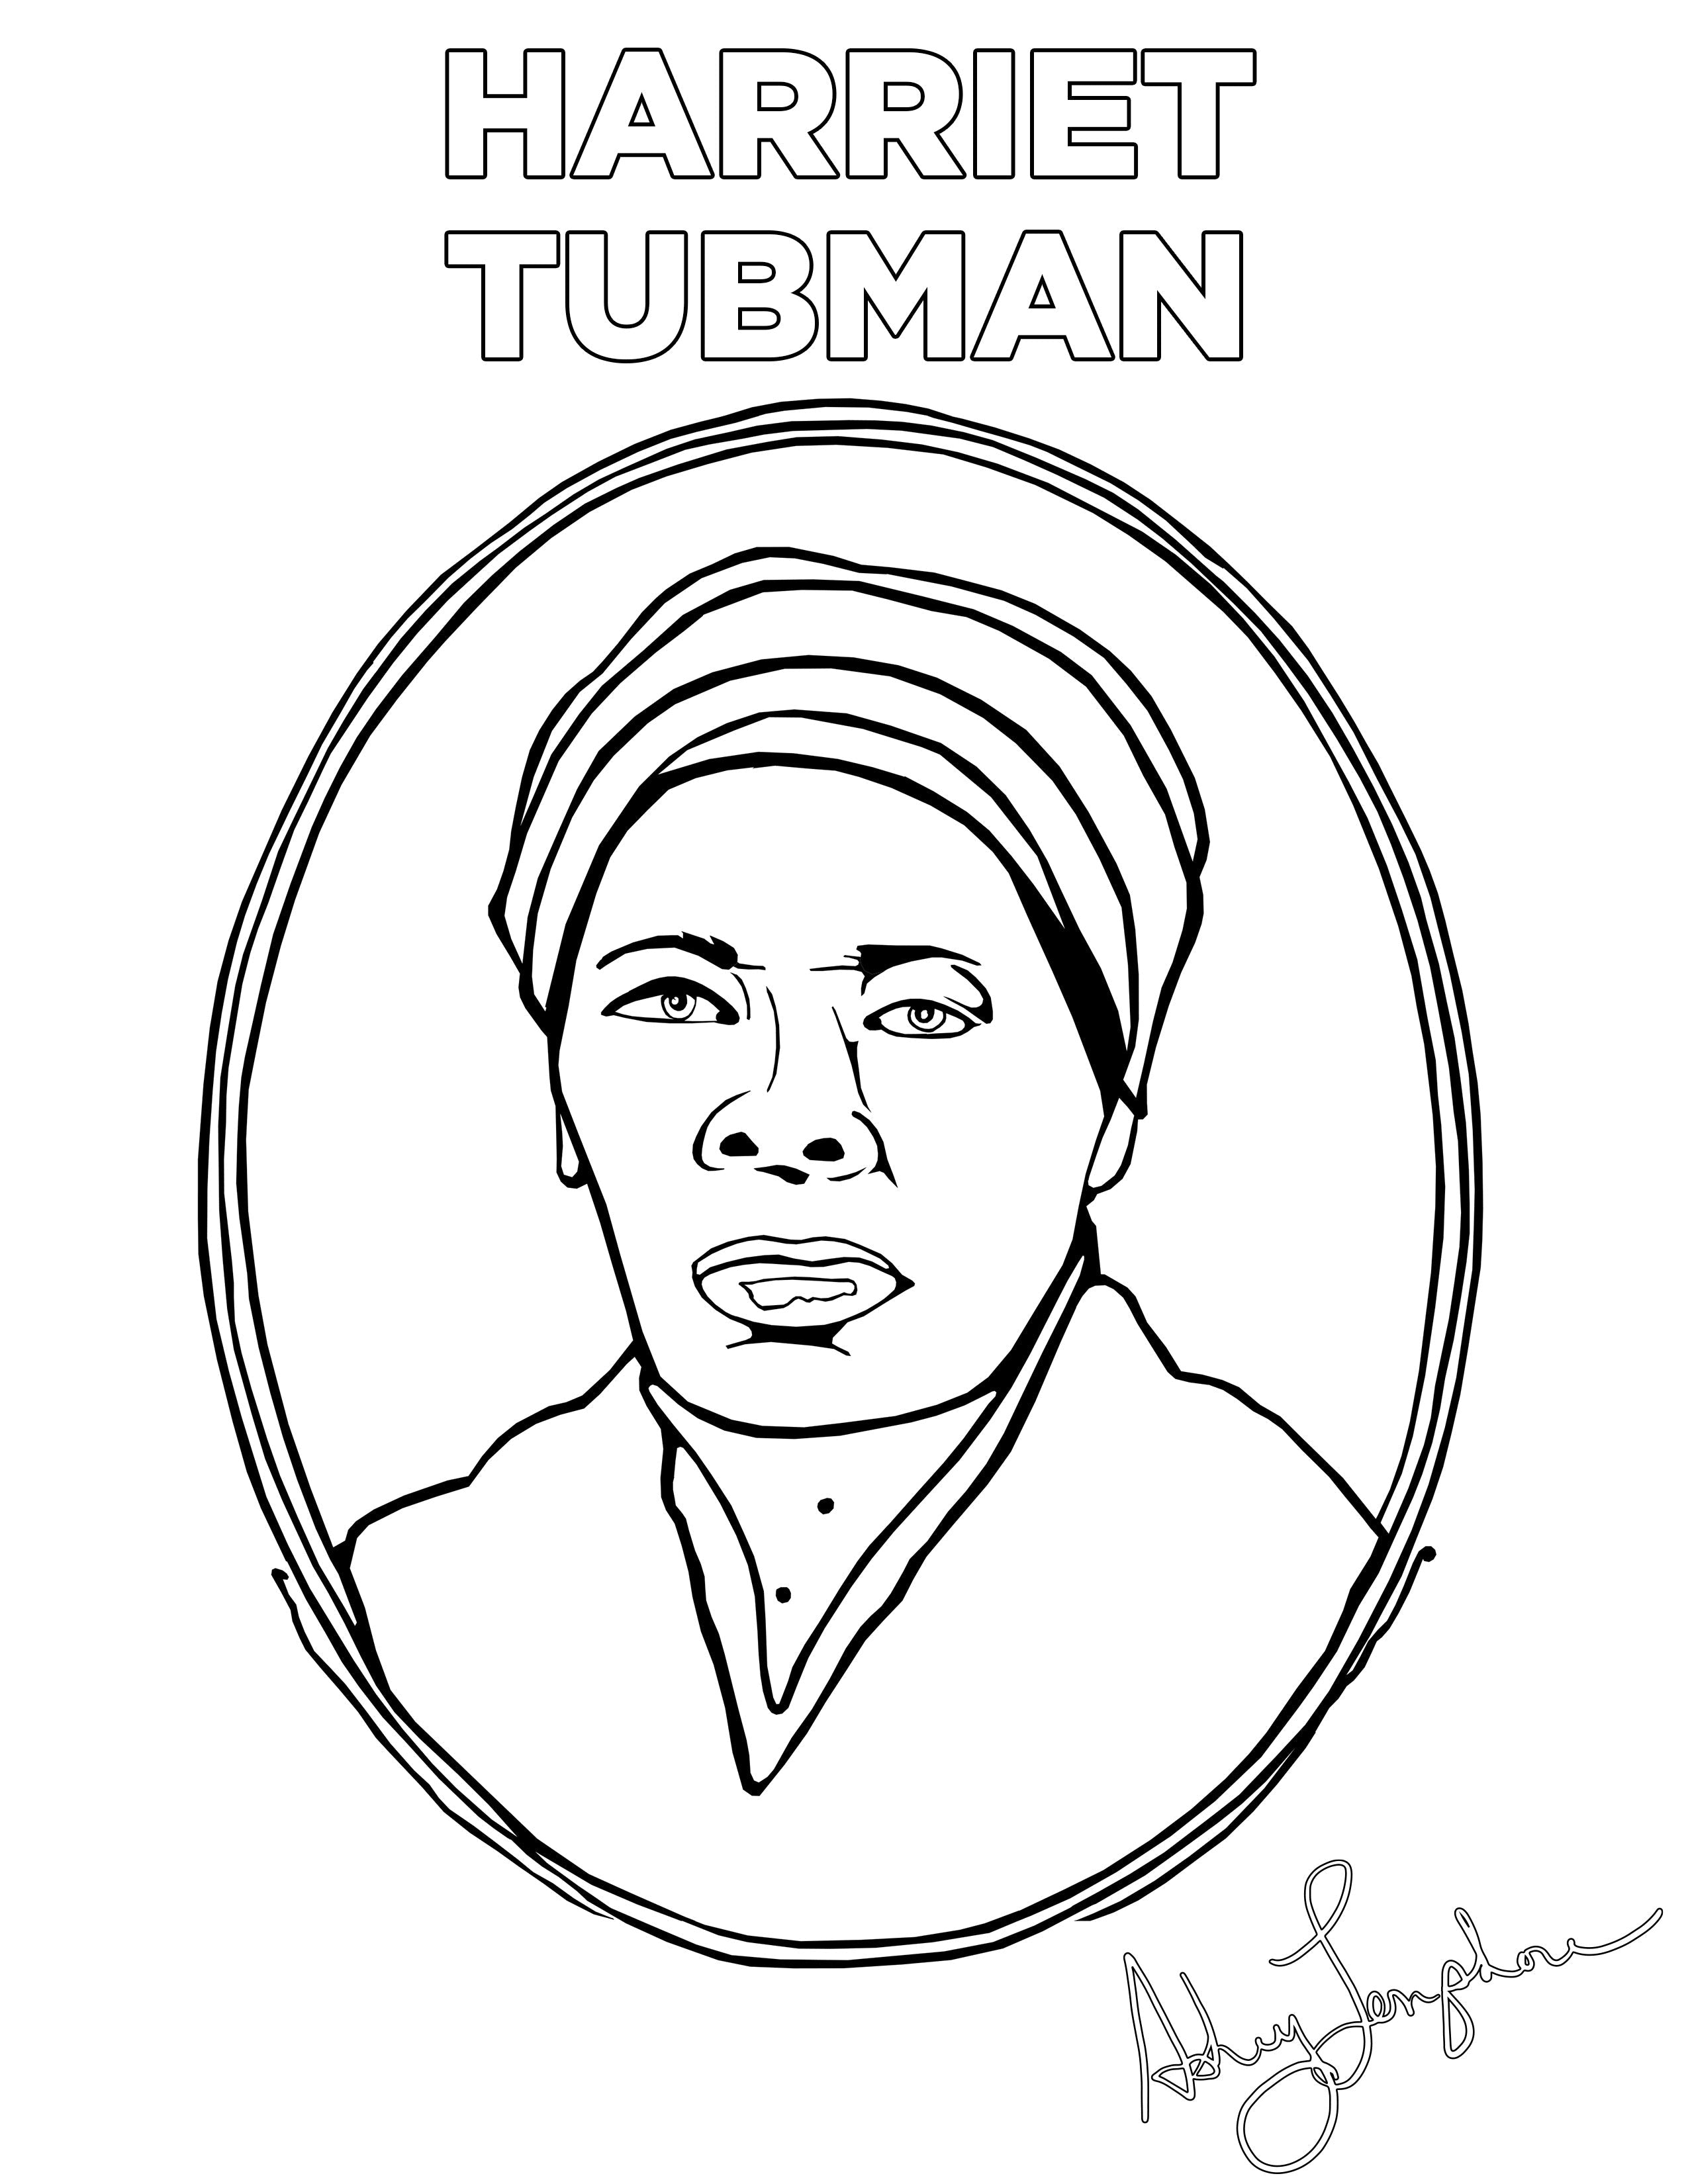 Ashley Longshore coloring pages featuring Harriet Tubman.